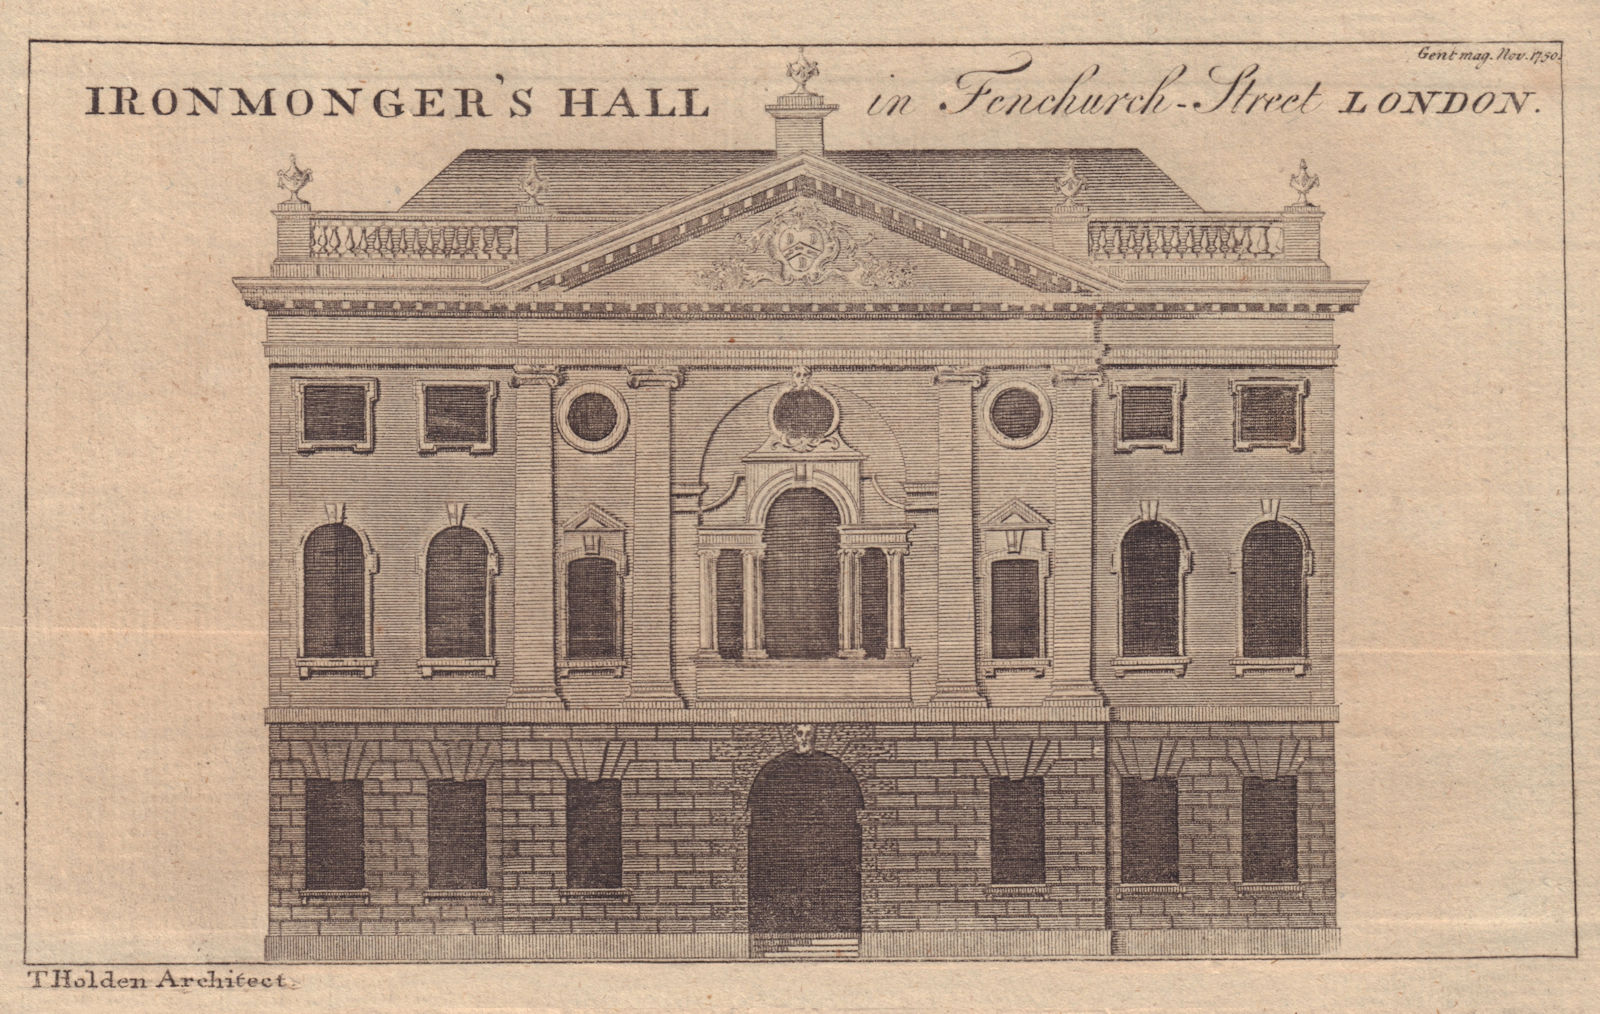 Elevation of Ironmonger's Hall in Fenchurch Street London. GENTS MAG 1750